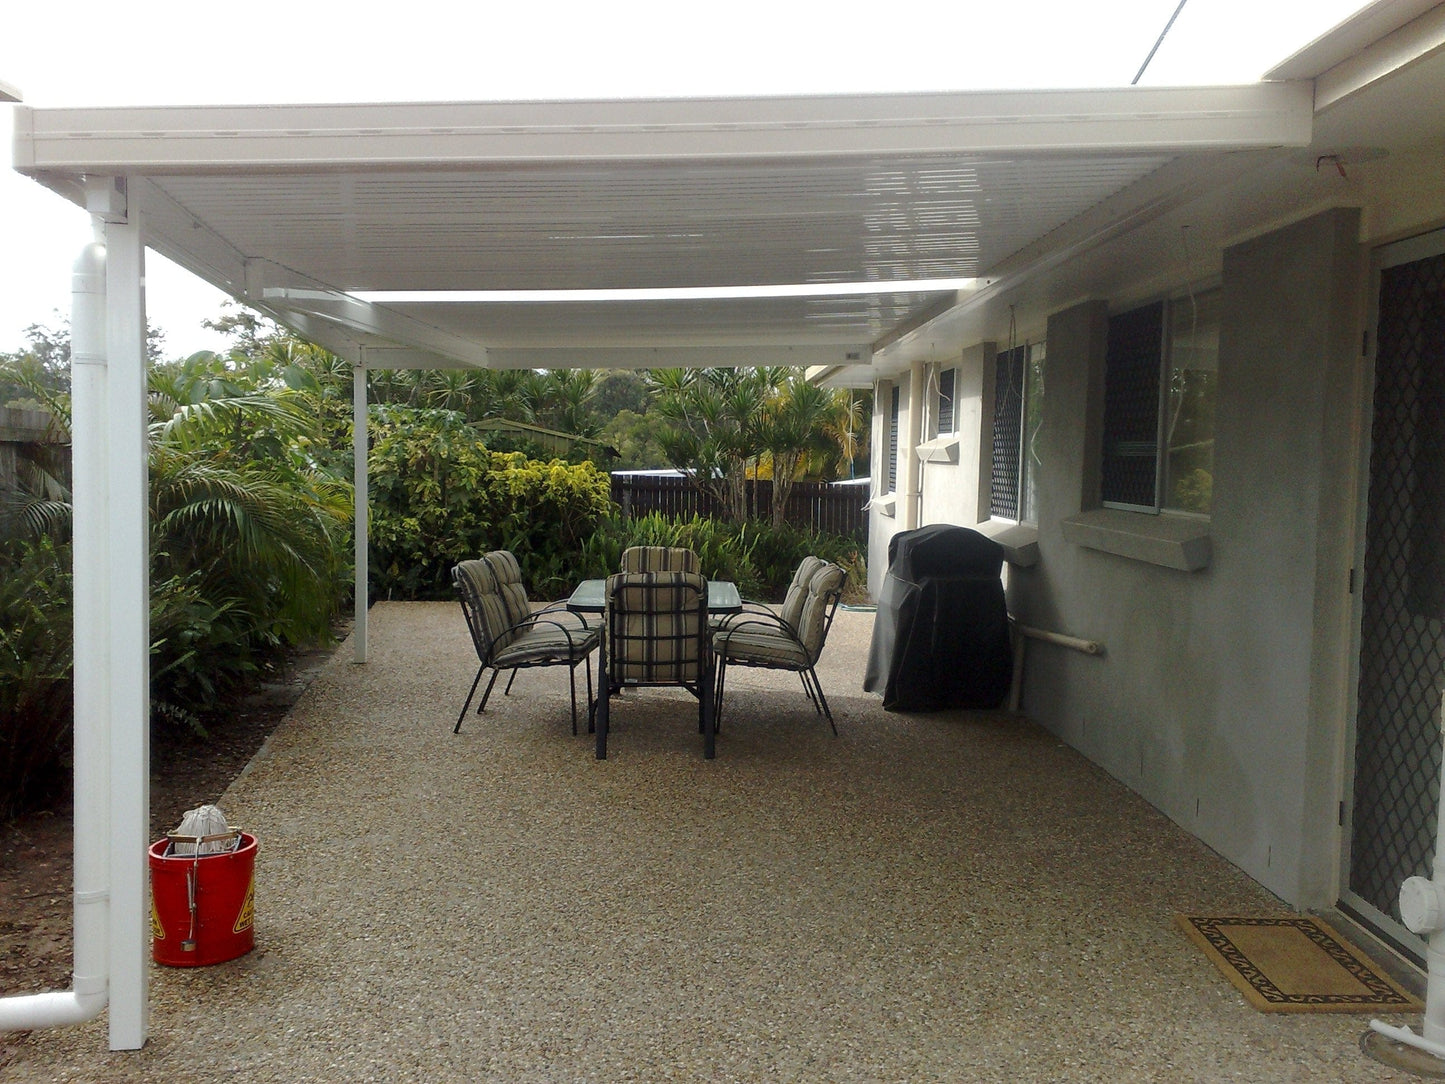 NON-INSULATED Skillion Patio - 3m x 3m-  Supply & Install QHI National